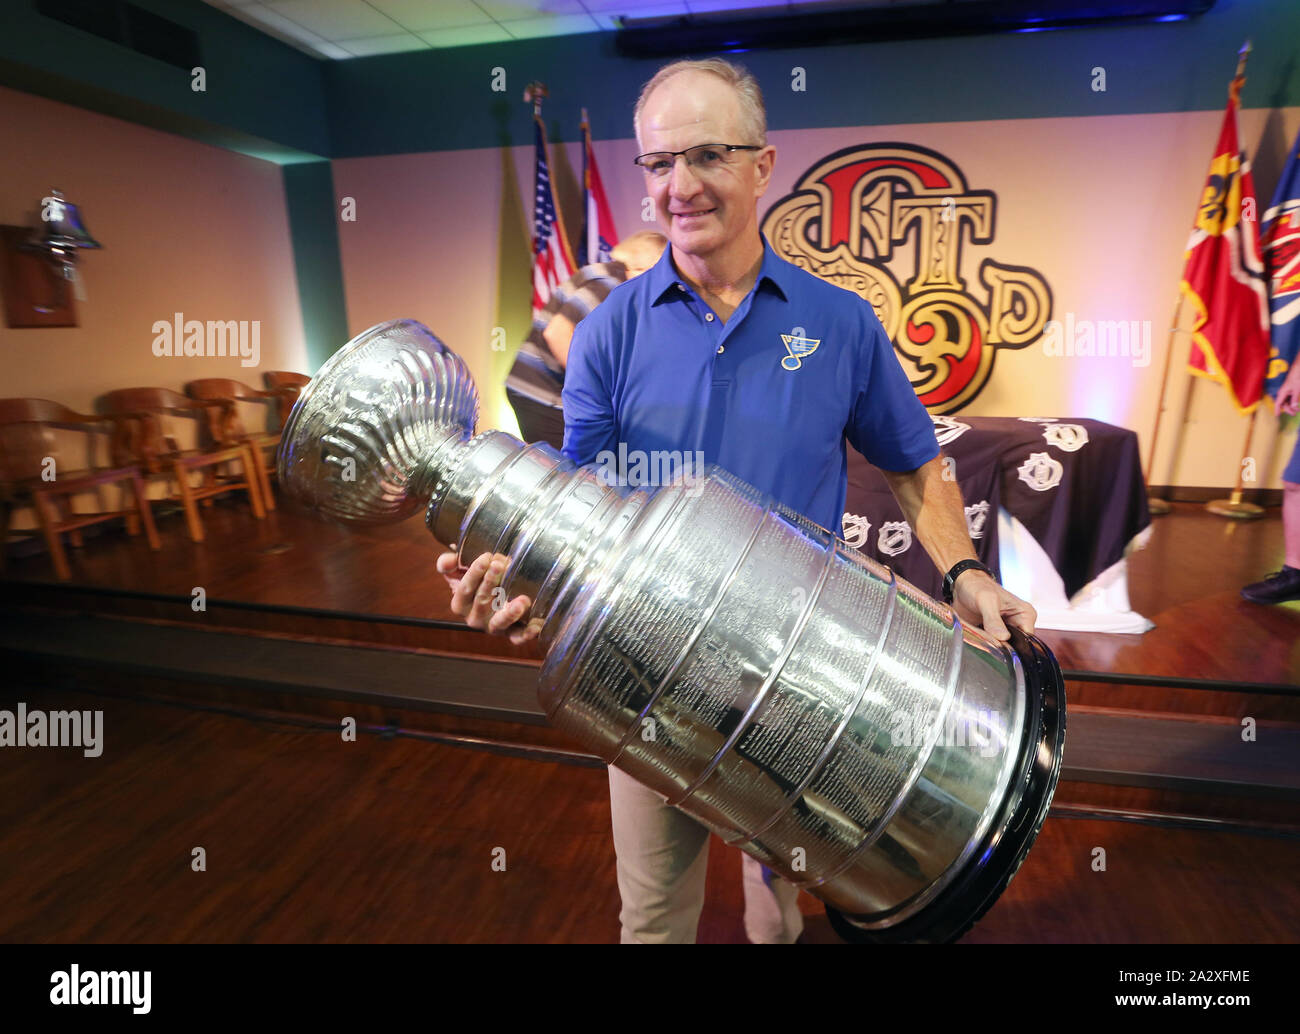 https://c8.alamy.com/comp/2A2XFME/st-louis-united-states-03rd-oct-2019-former-st-louis-blues-defenseman-and-member-of-the-national-hockey-league-hall-of-fame-al-macinnis-carries-the-stanley-cup-after-a-visit-to-the-st-louis-fire-department-headquarters-building-on-thursday-october-3-2019-the-stanley-cup-won-by-the-st-louis-blues-in-june-2019-is-making-a-final-tour-around-the-st-louis-area-before-returning-to-the-hockey-hall-of-fame-photo-by-bill-greenblattupi-credit-upialamy-live-news-2A2XFME.jpg